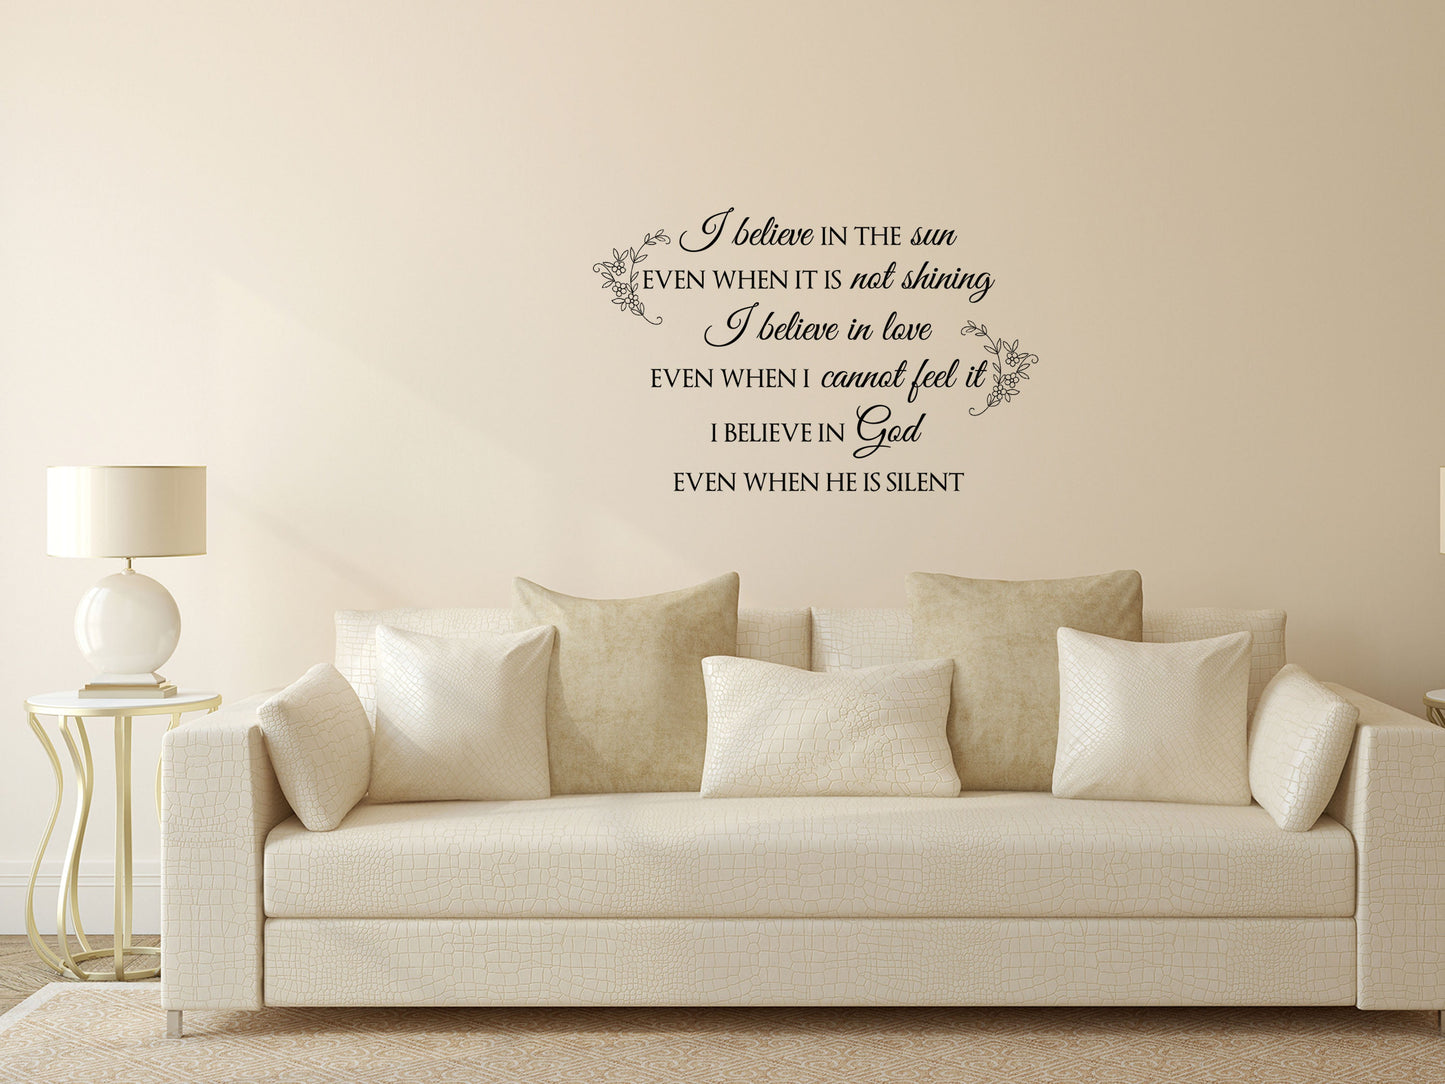 I Believe In The Sun - Inspirational Wall Signs Vinyl Wall Decal Inspirational Wall Signs 